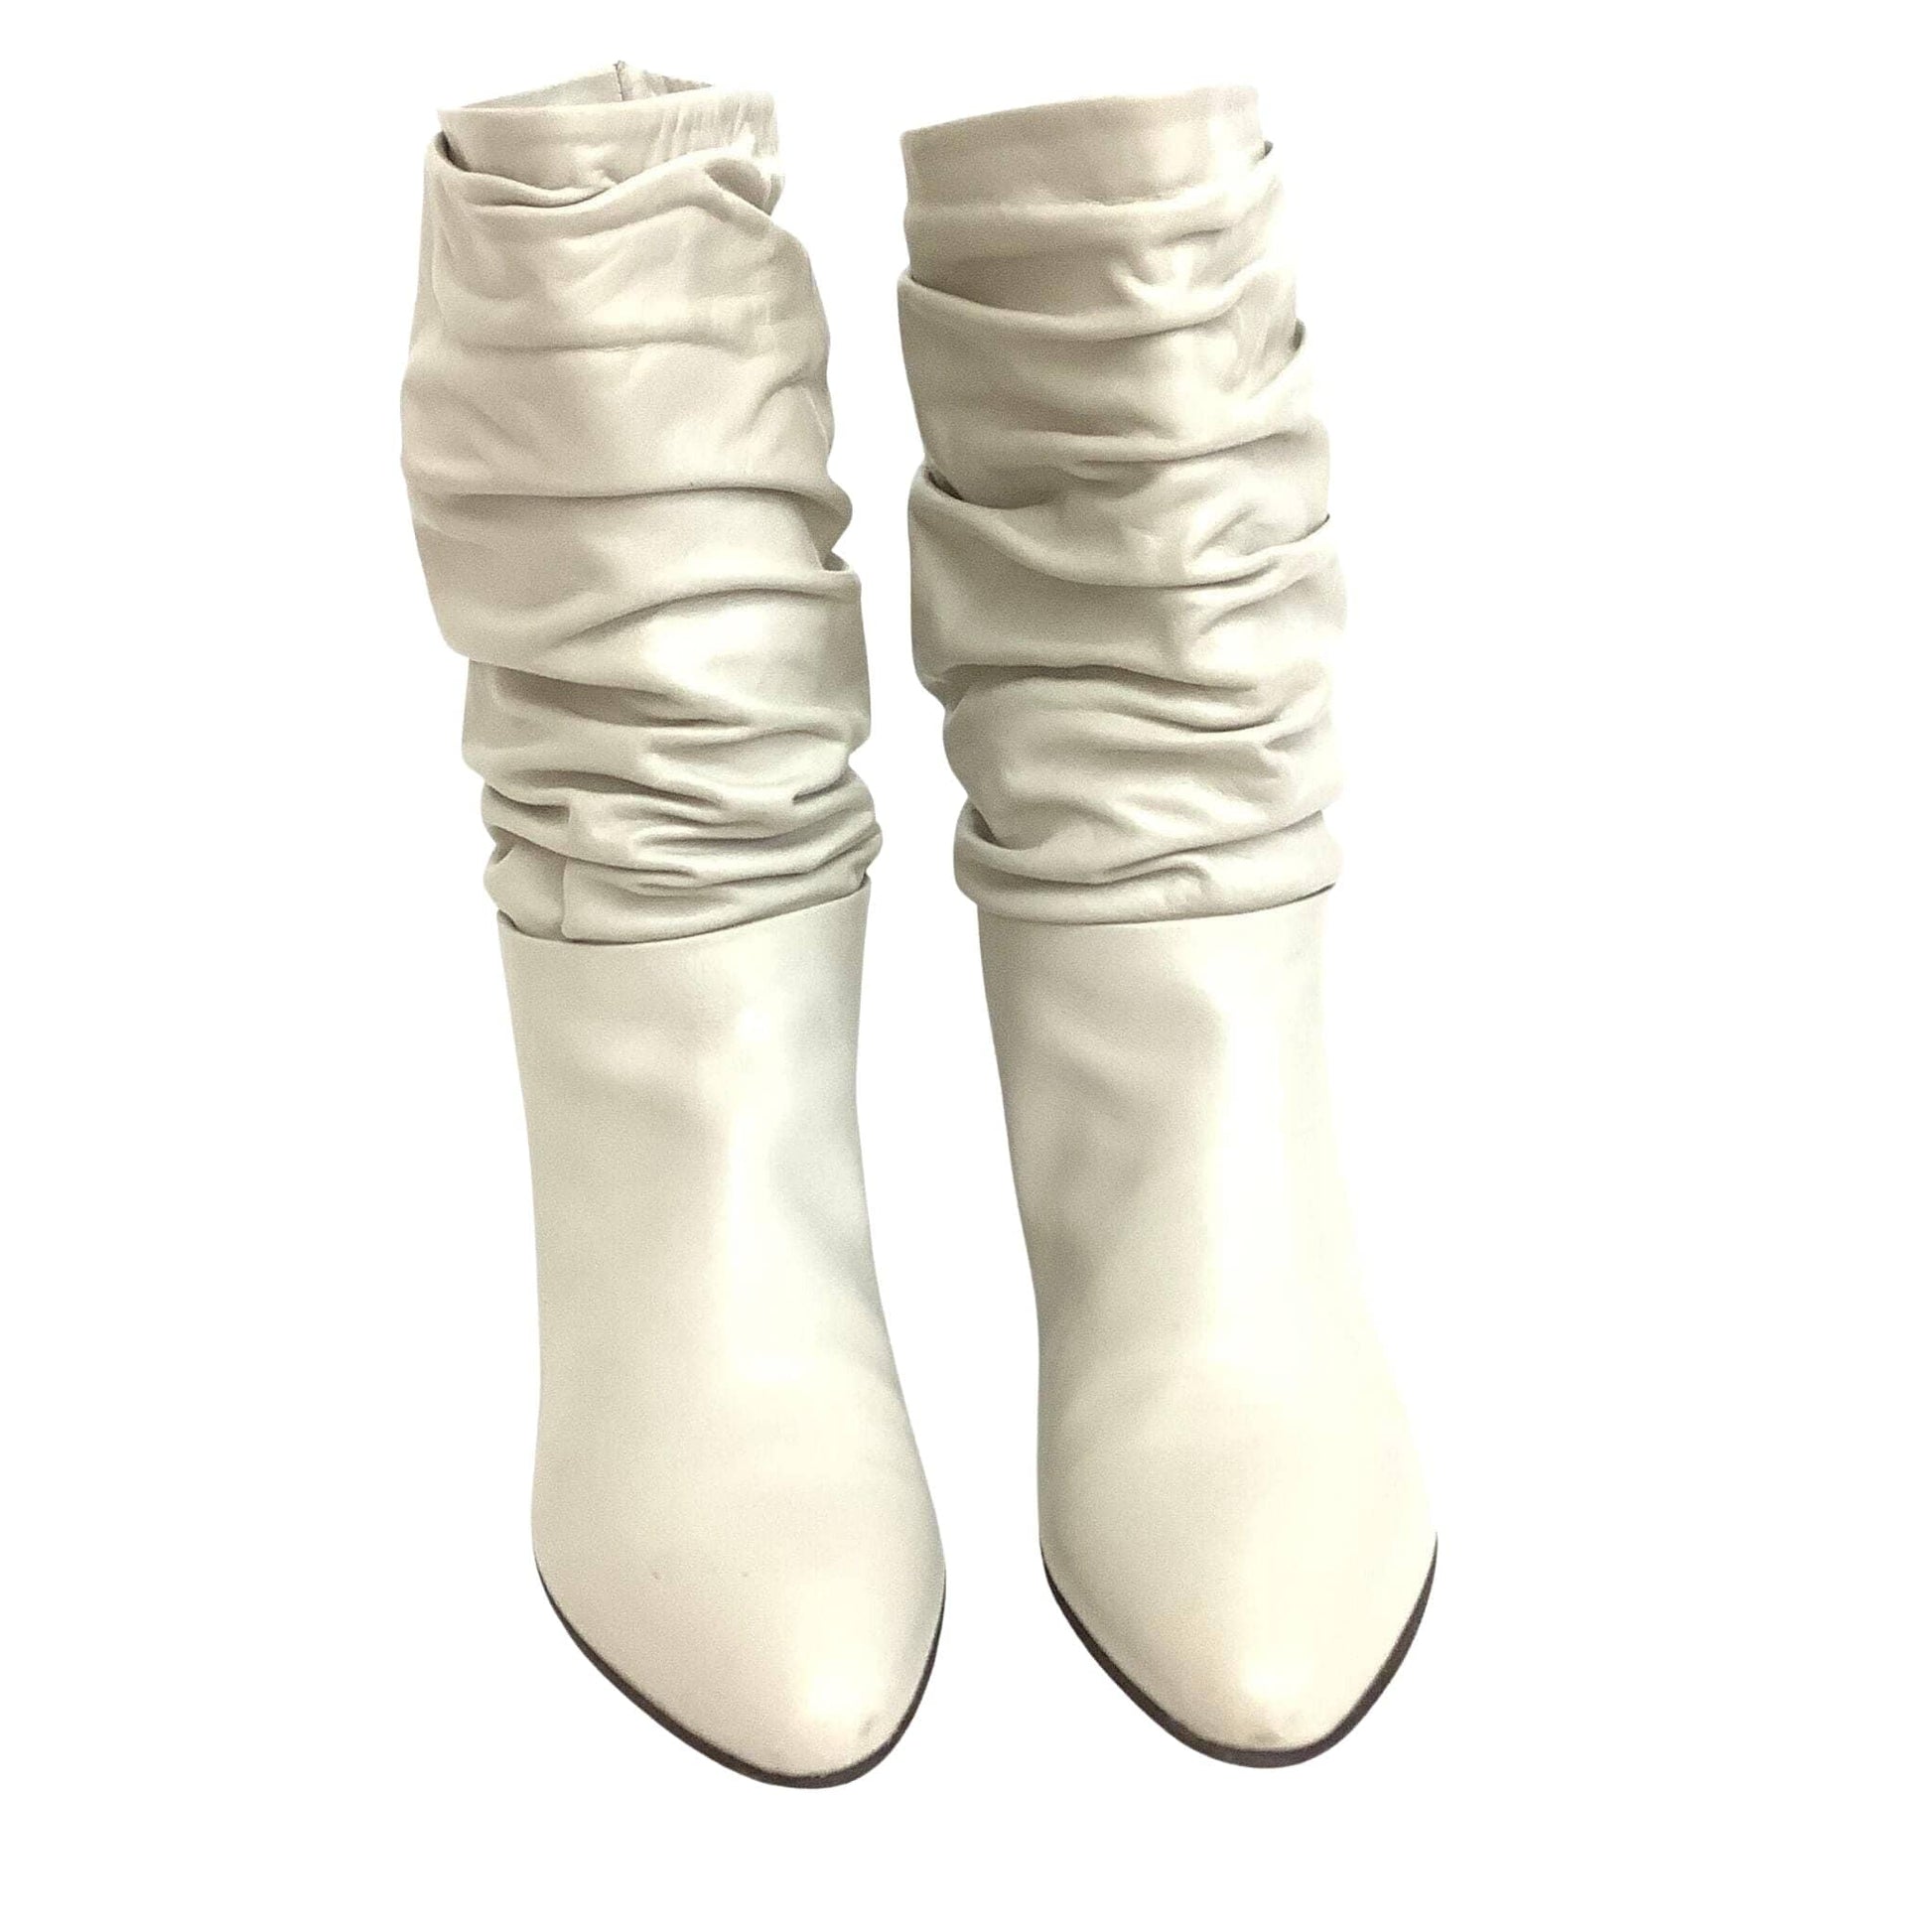 1980s White Slouch Boots 8.5 / White / Vintage 1980s